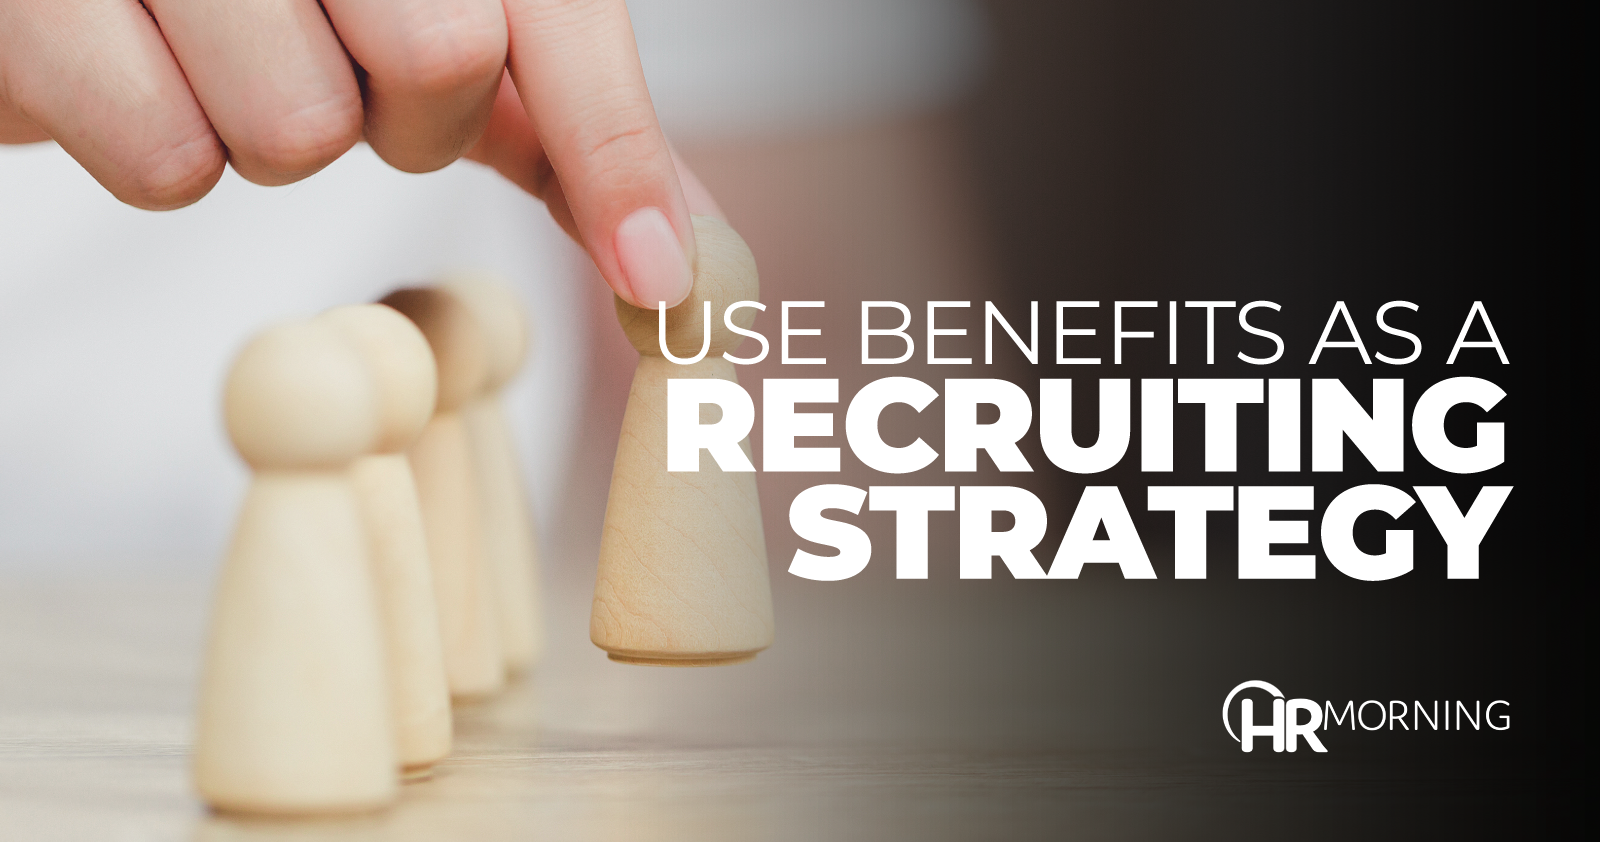 Use Benefits As A Recruiting Strategy